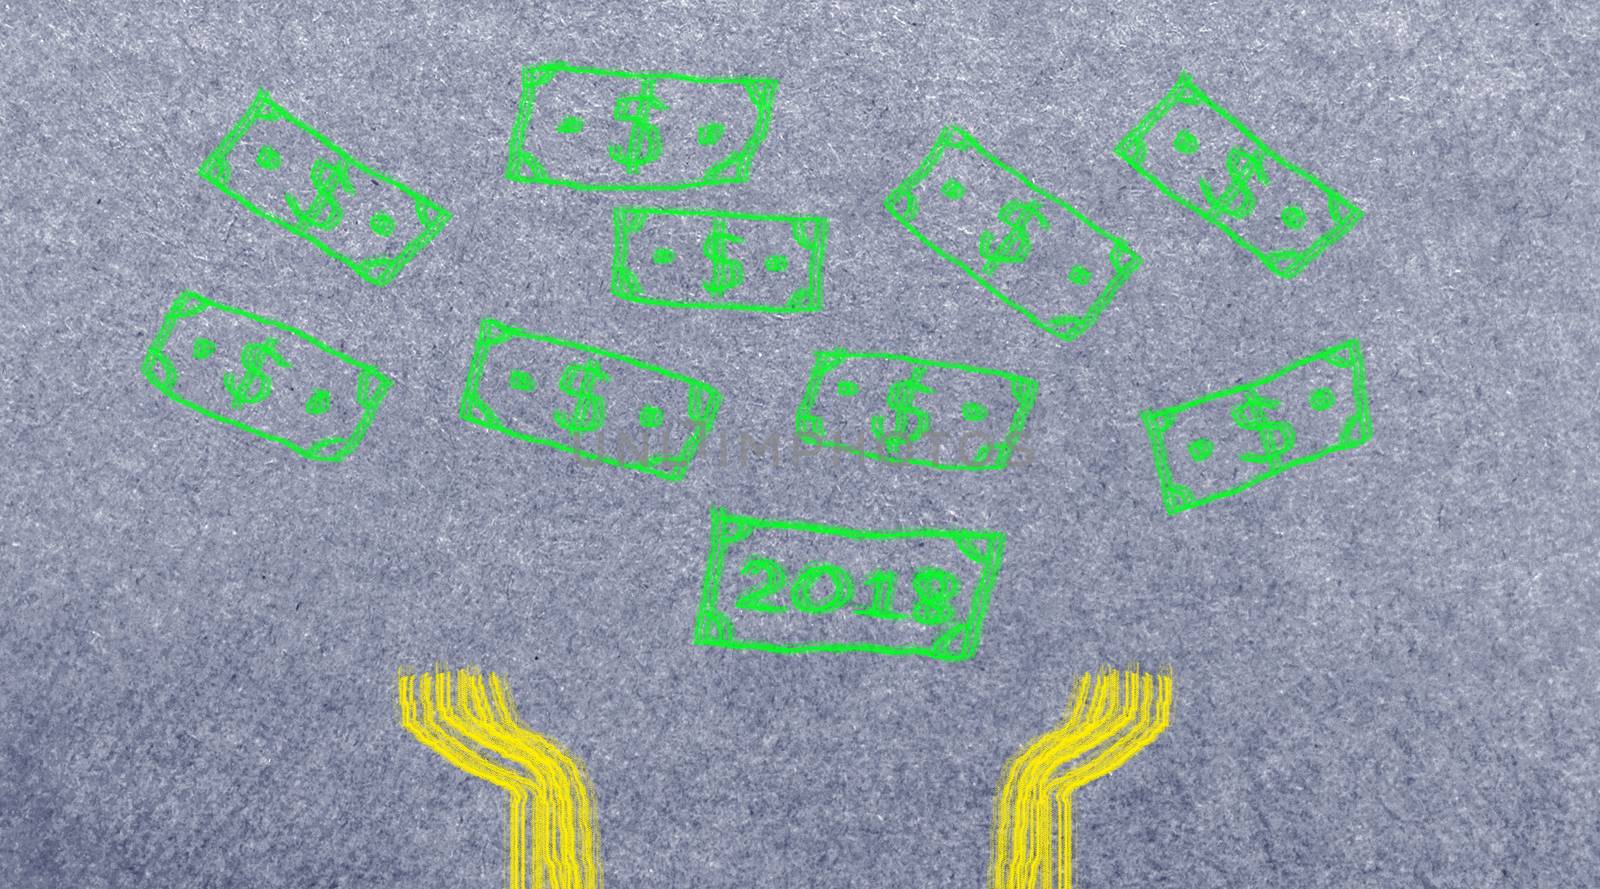 Dollar sign symbol falling down with hands waiting. Idea 2018, Easy brush illustration paint on grey paper textures background.